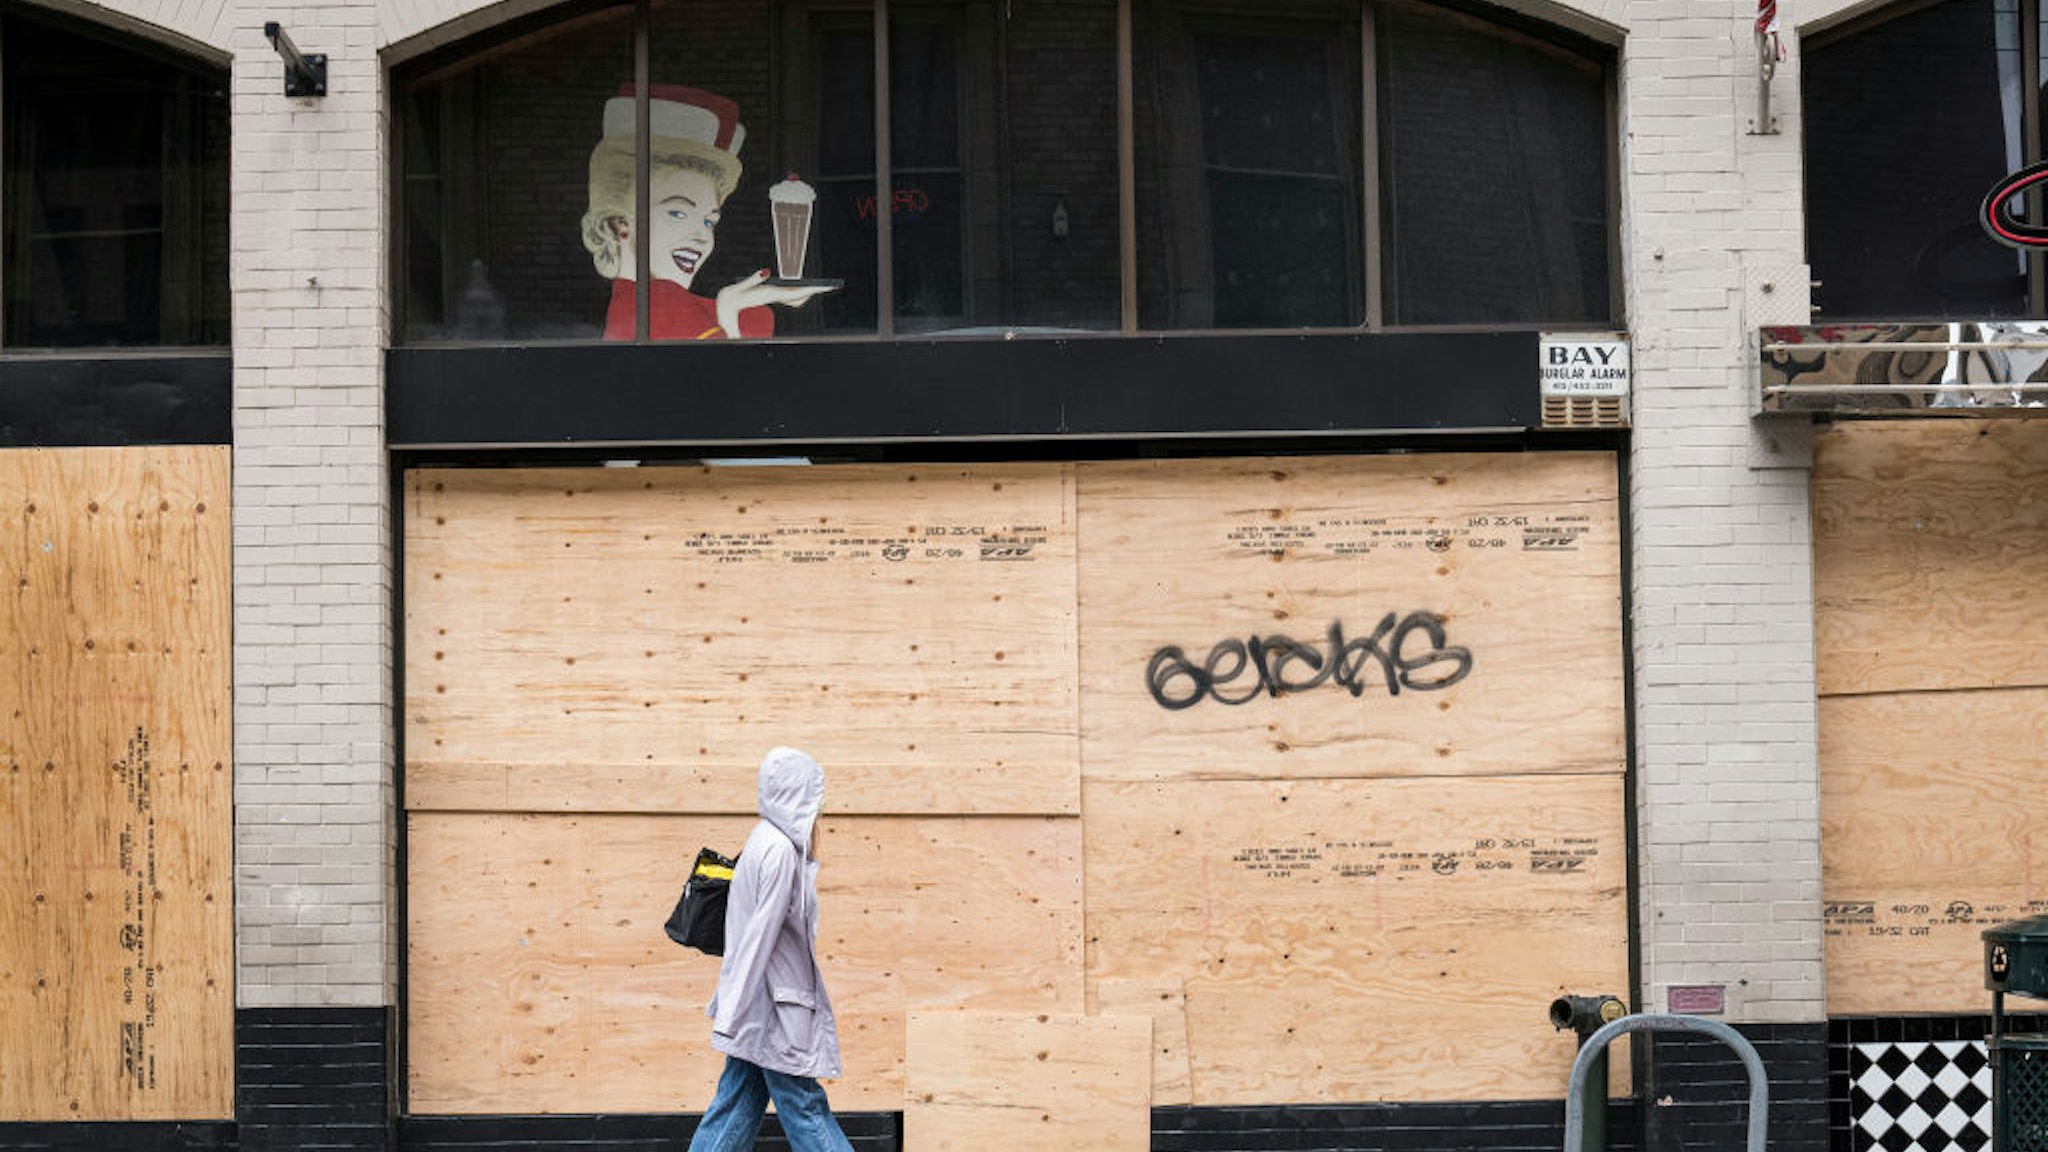 A pedestrian walks past a boarded up Lori's Diner in San Francisco, California, U.S., on Tuesday, March 24, 2020. Governors from coast to coast Friday told Americans not to leave home except for dire circumstances and ordered nonessential business to shut their doors.